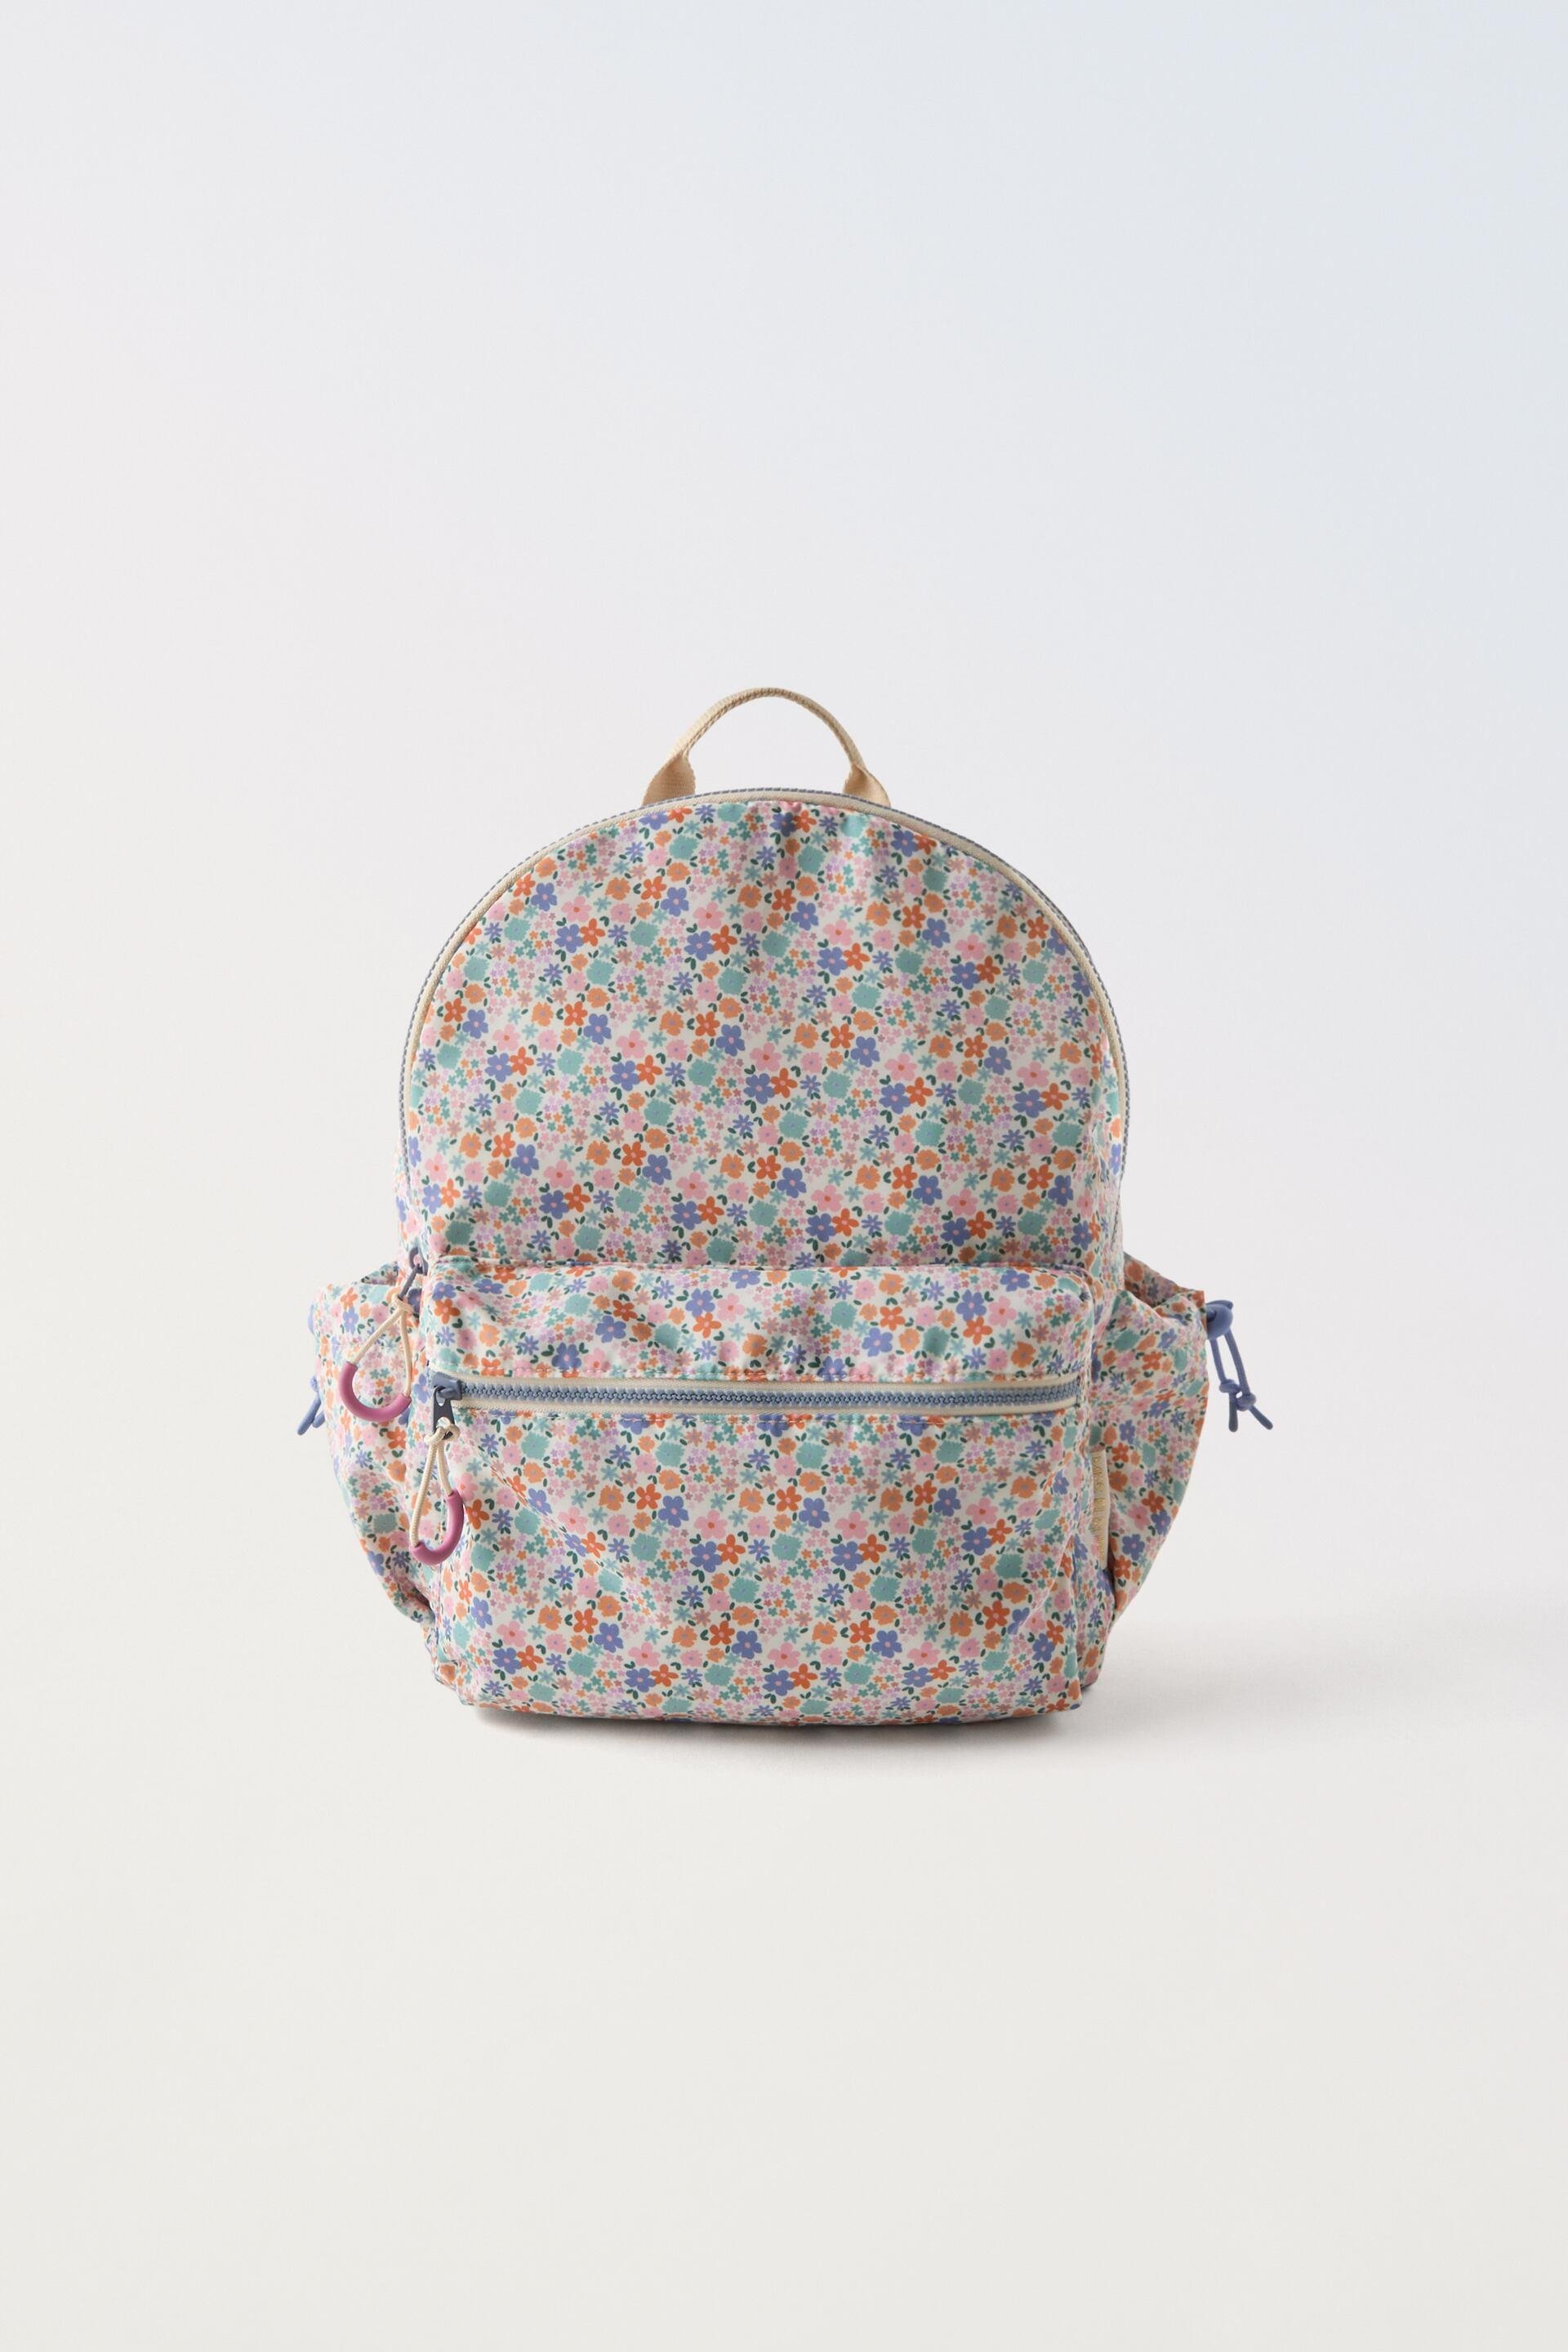 FLORAL BACKPACK by ZARA